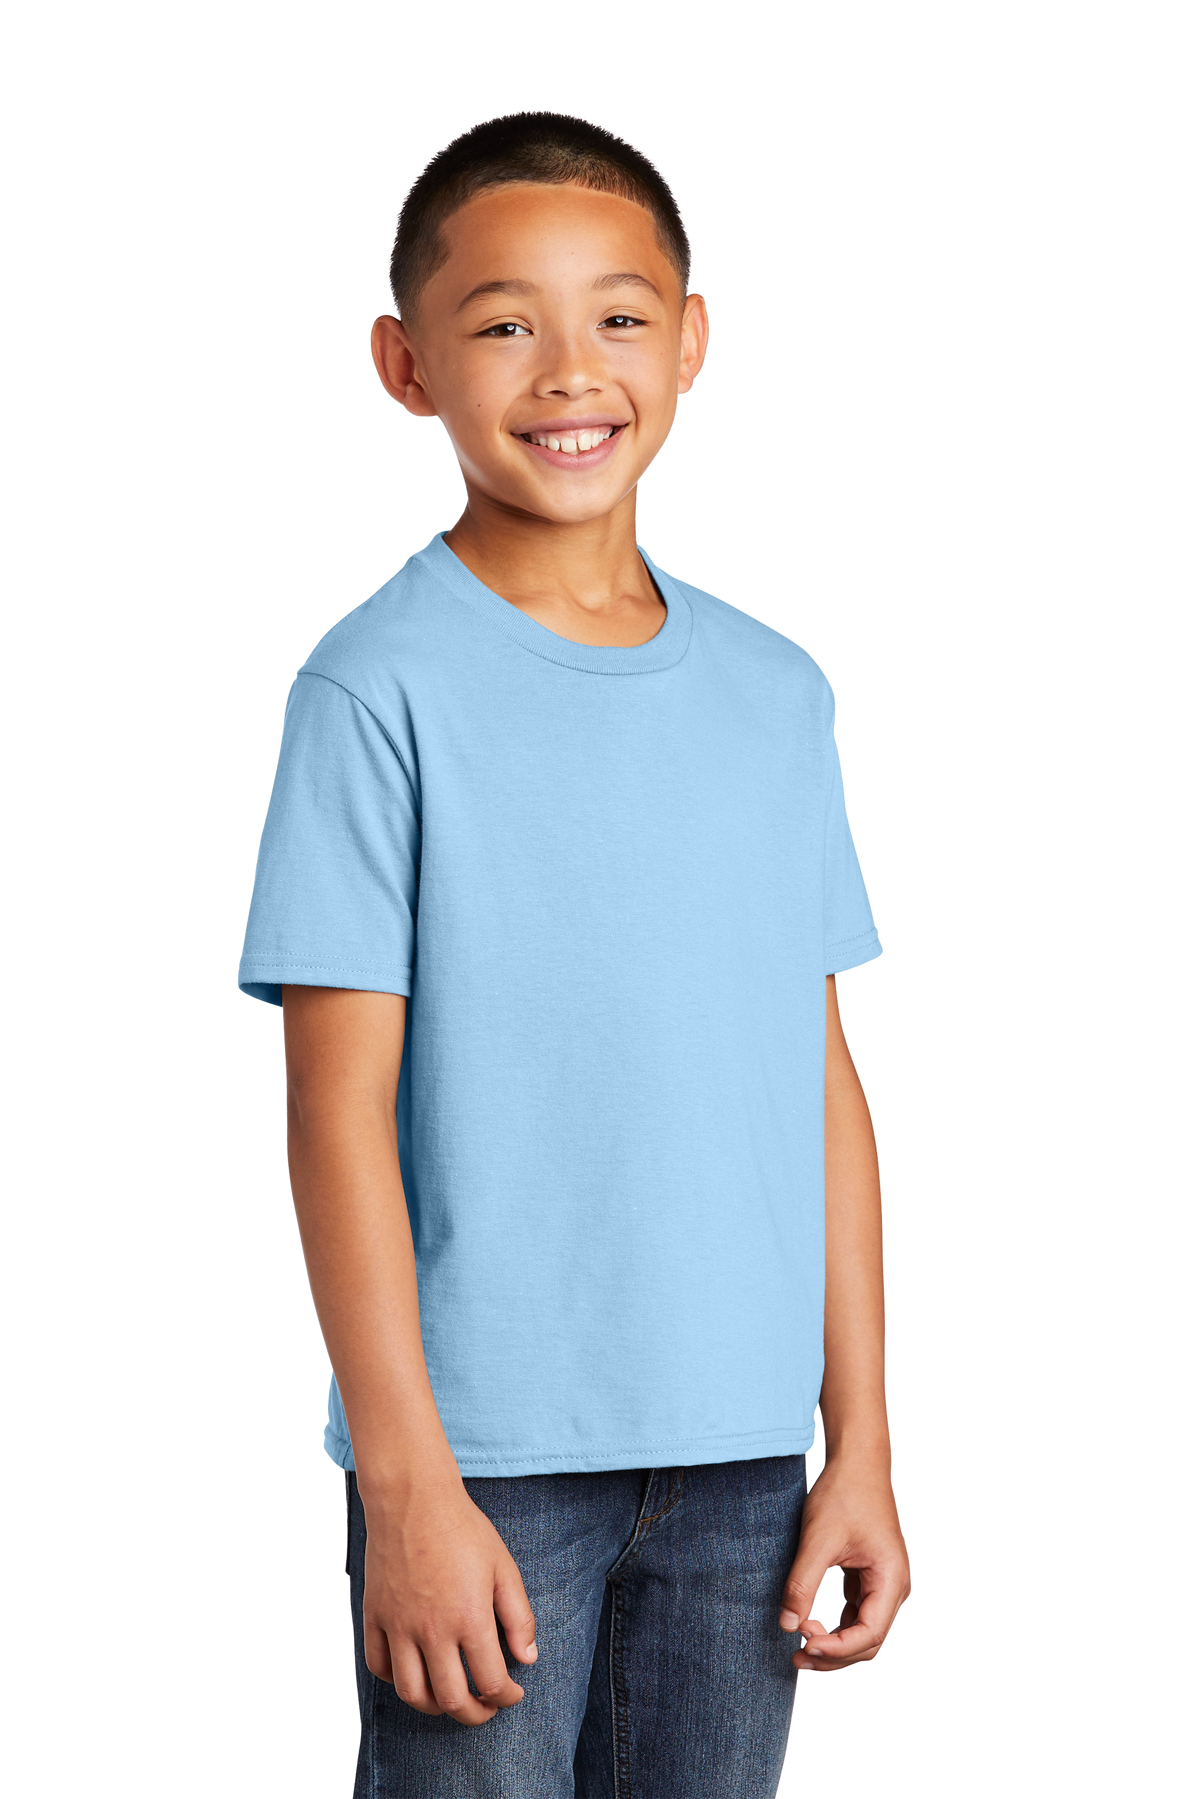 Port & Company ® Youth Fan Favorite™Tee | Product | Company Casuals